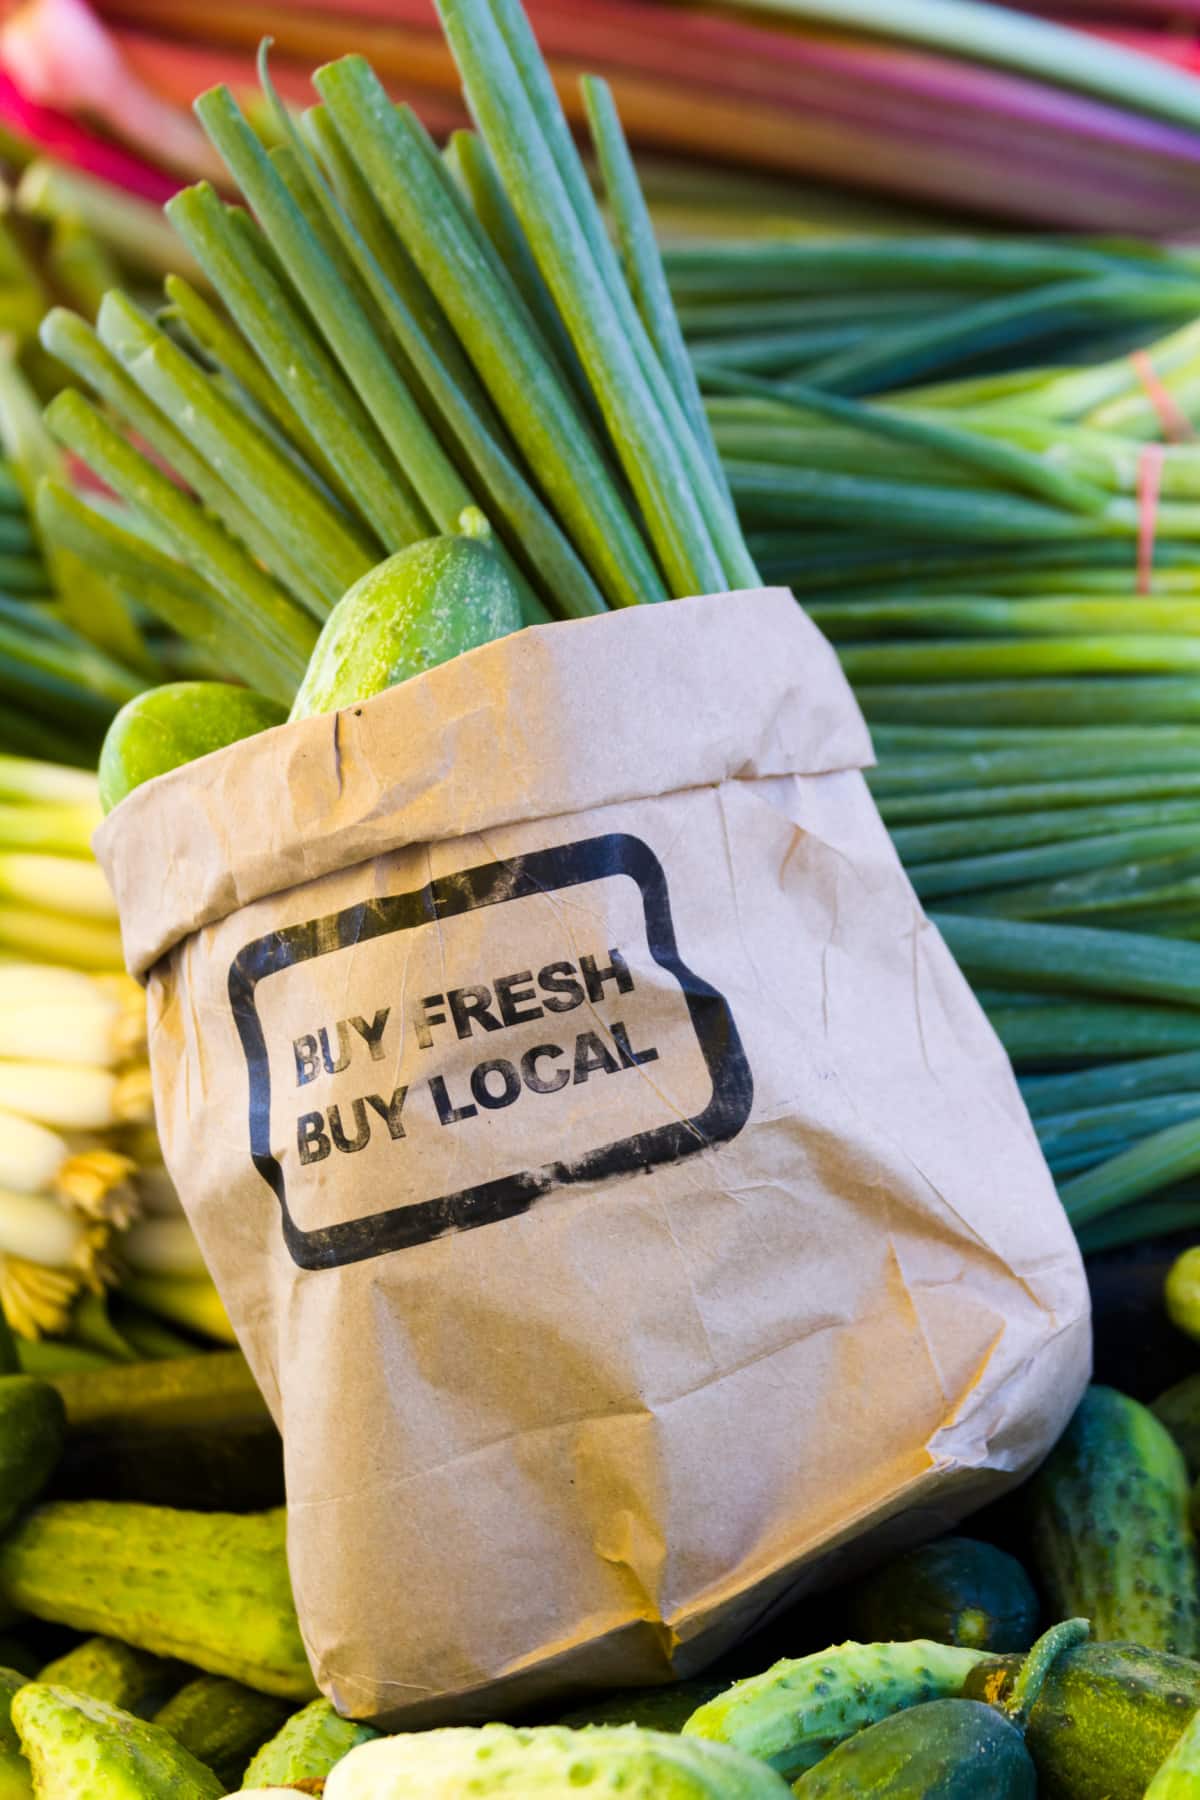 A brown paper bag featuring buy fresh buy local produce on sale at the local farmers market.